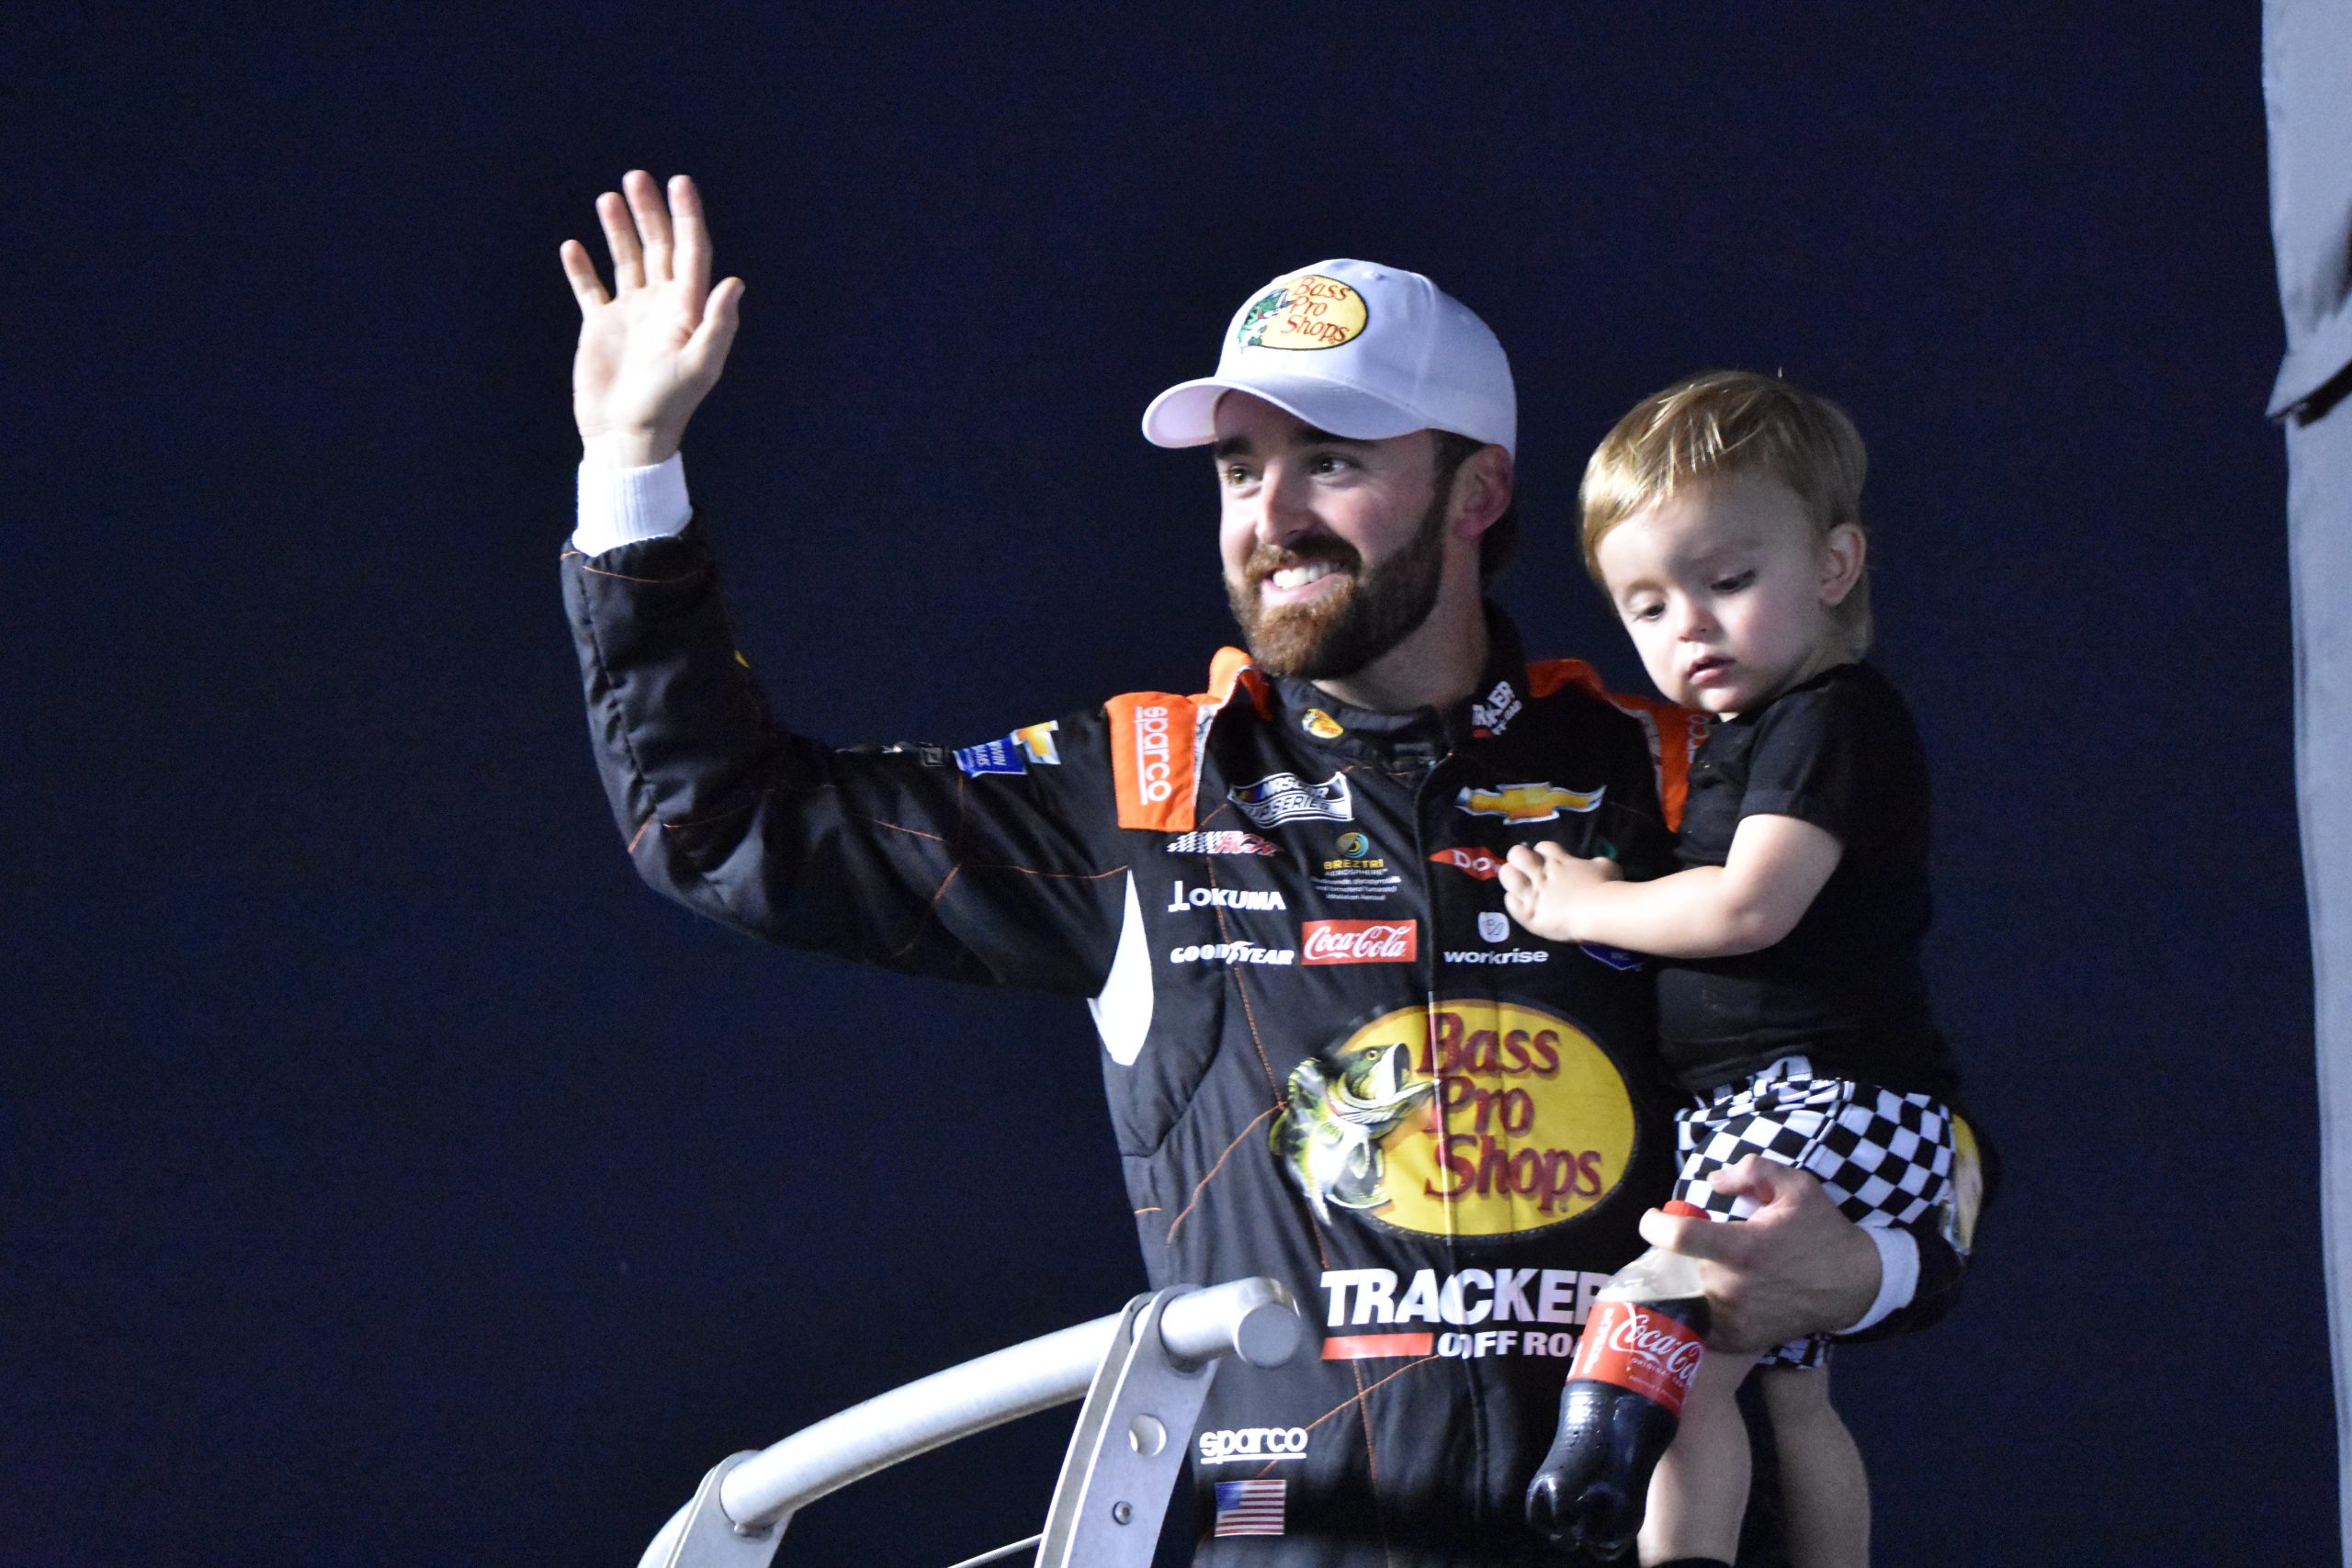 No doubt, Austin Dillon cherishes moments with his son, Ace, as seen at Daytona. (Photo: Luis Torres | The Podium Finish)